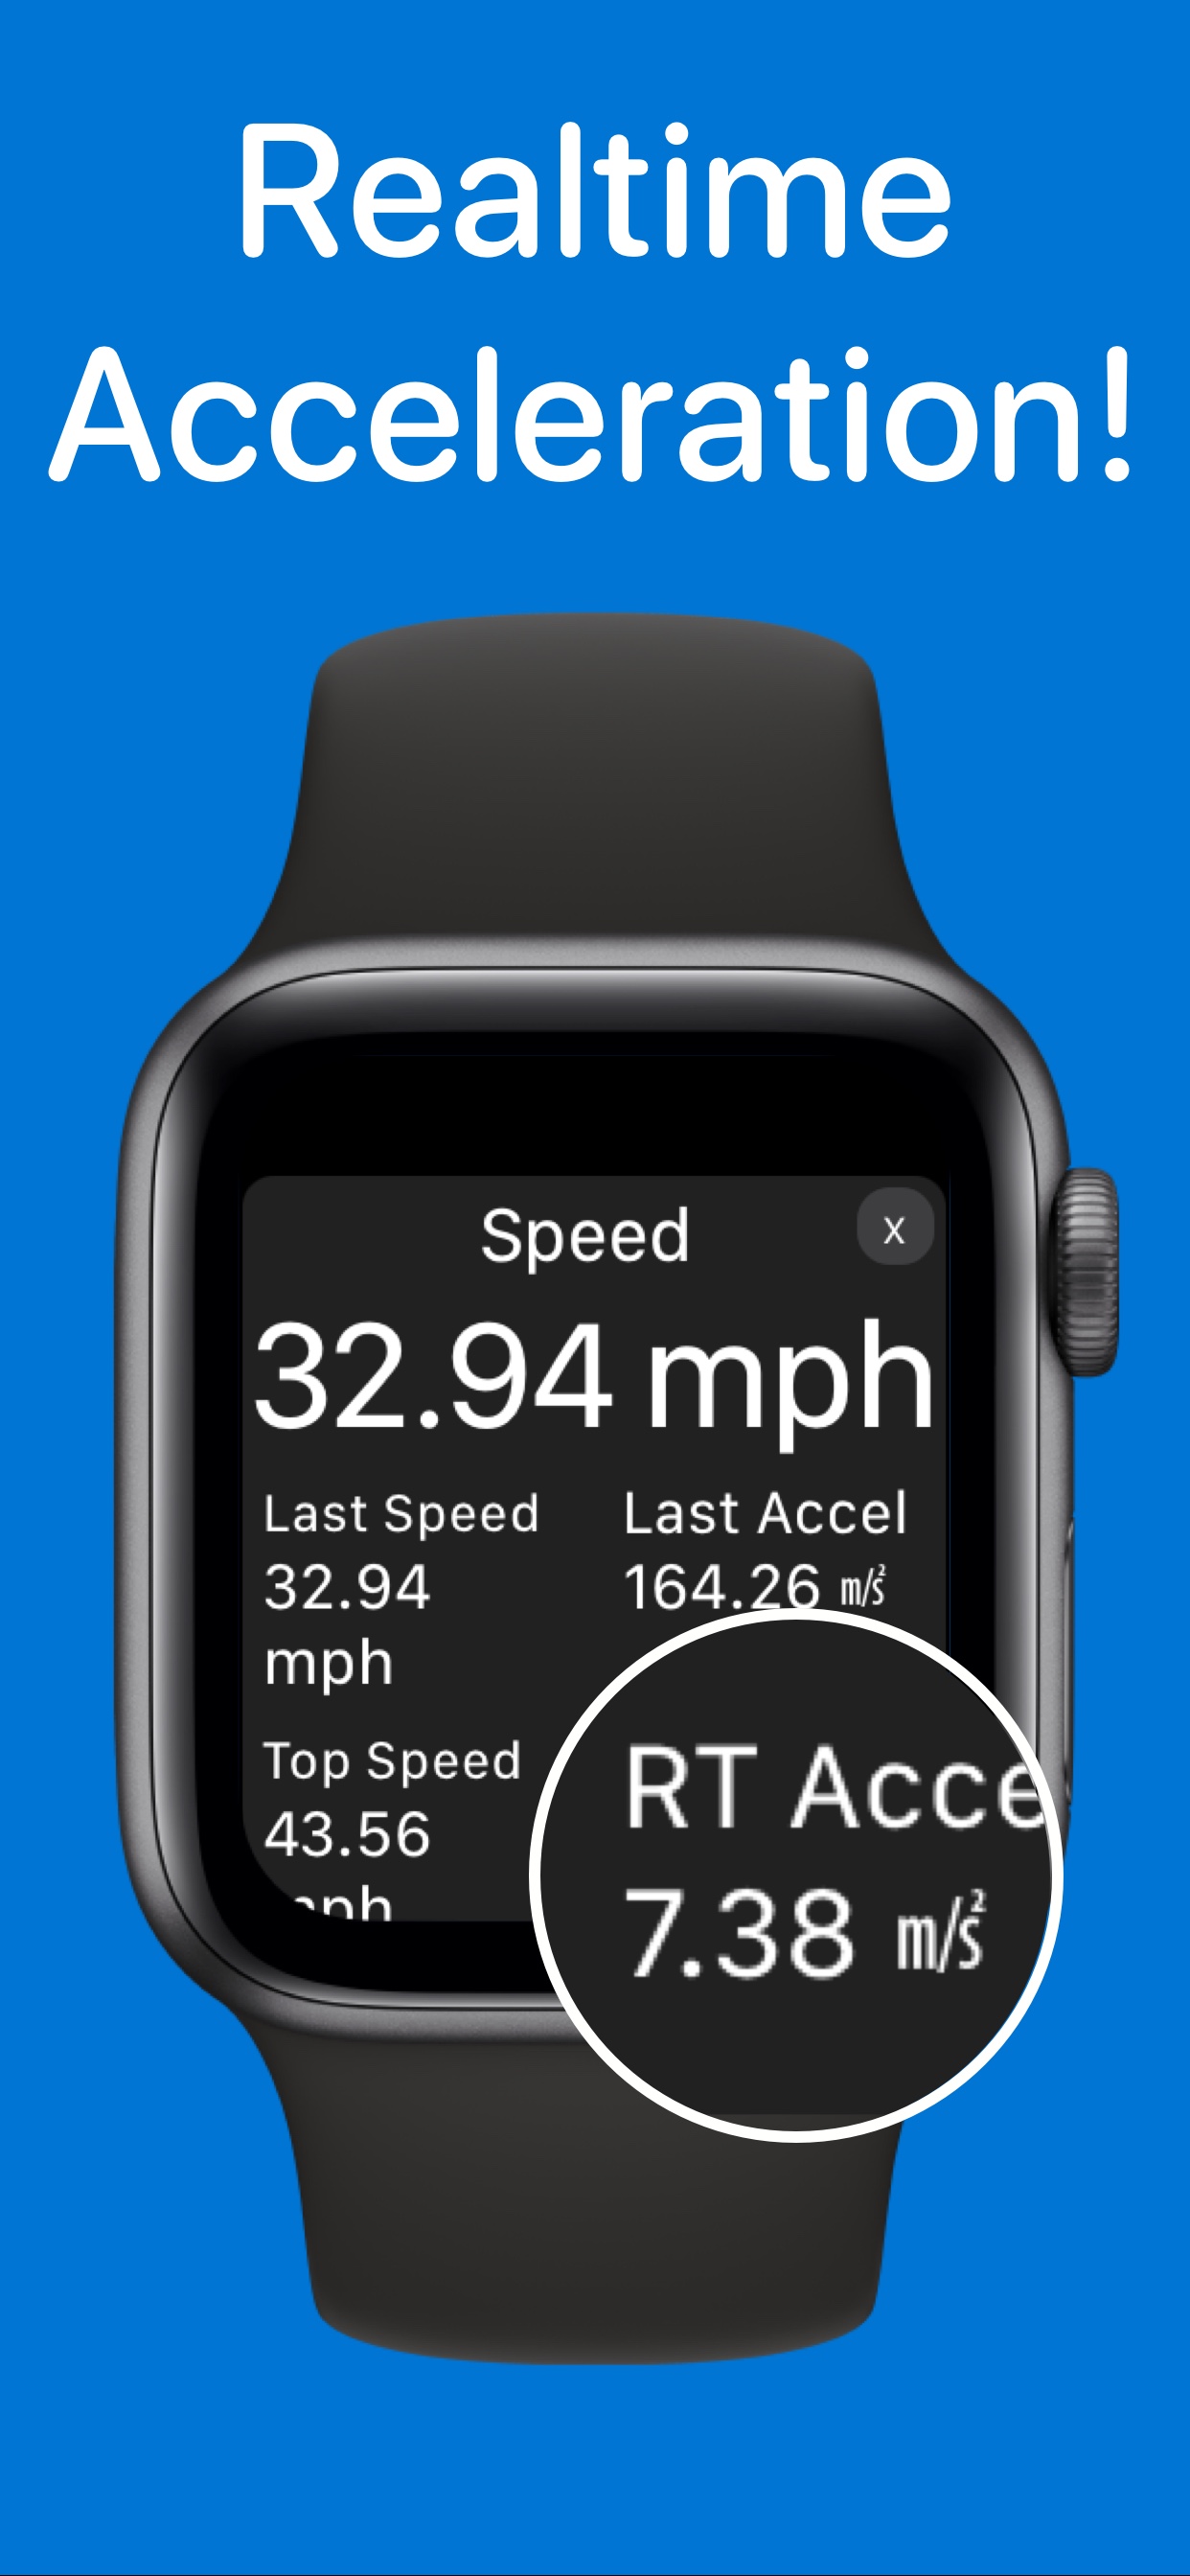 Arm Speed Analyzer tracks realtime acceleration using your Apple Watch